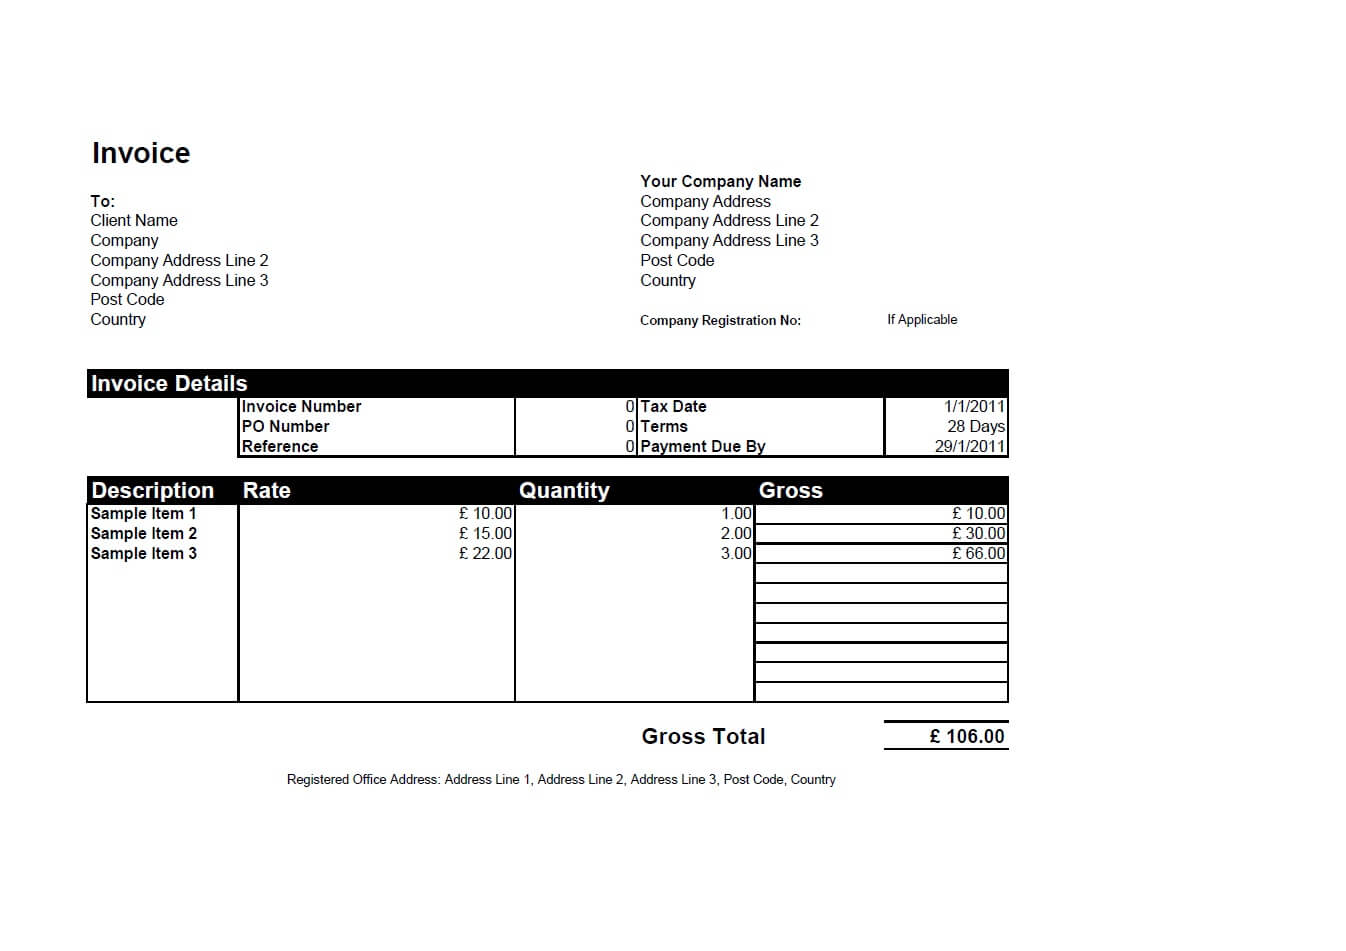 Basic Invoice | Simple Invoice Template for Excel